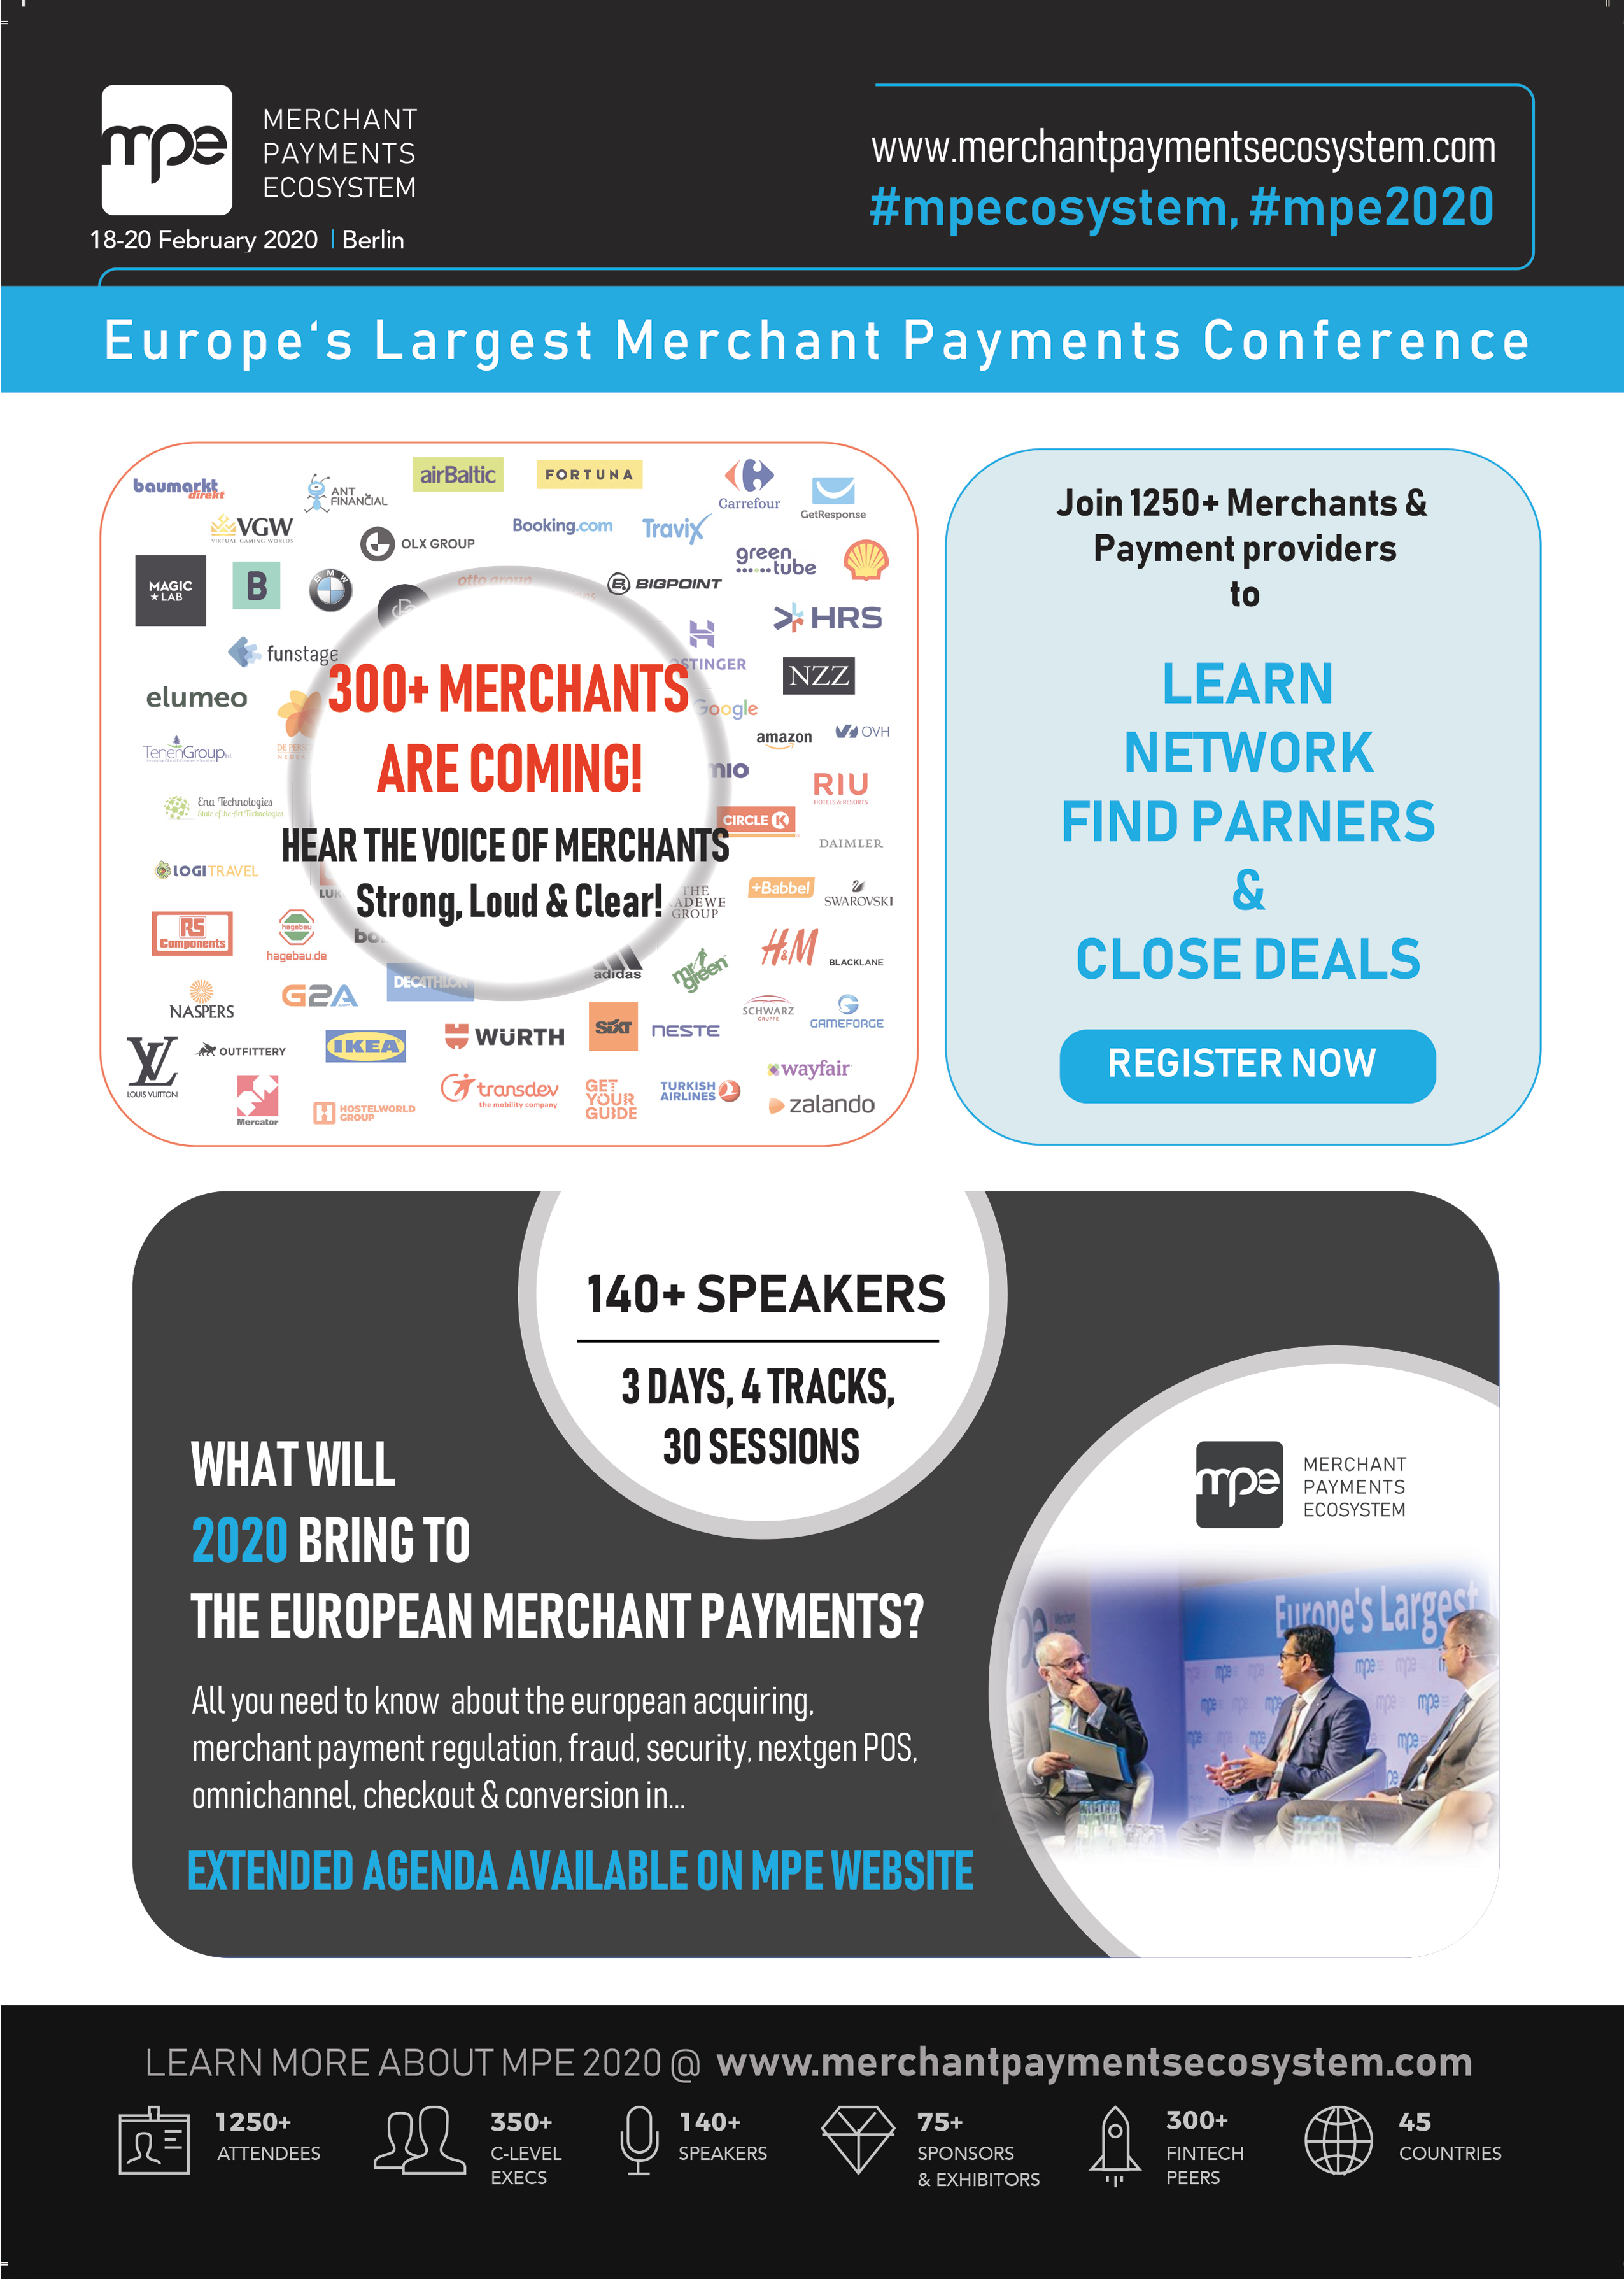 Back for its 13th year MPE2020 (Merchant Payment Ecosystems) in Berlin (18-20 Feb 2020) is set to be the biggest ever, with over 1,500 founders, startup enthusiasts, corporates, angel investors, VCs, and media gathering from across Europe. 